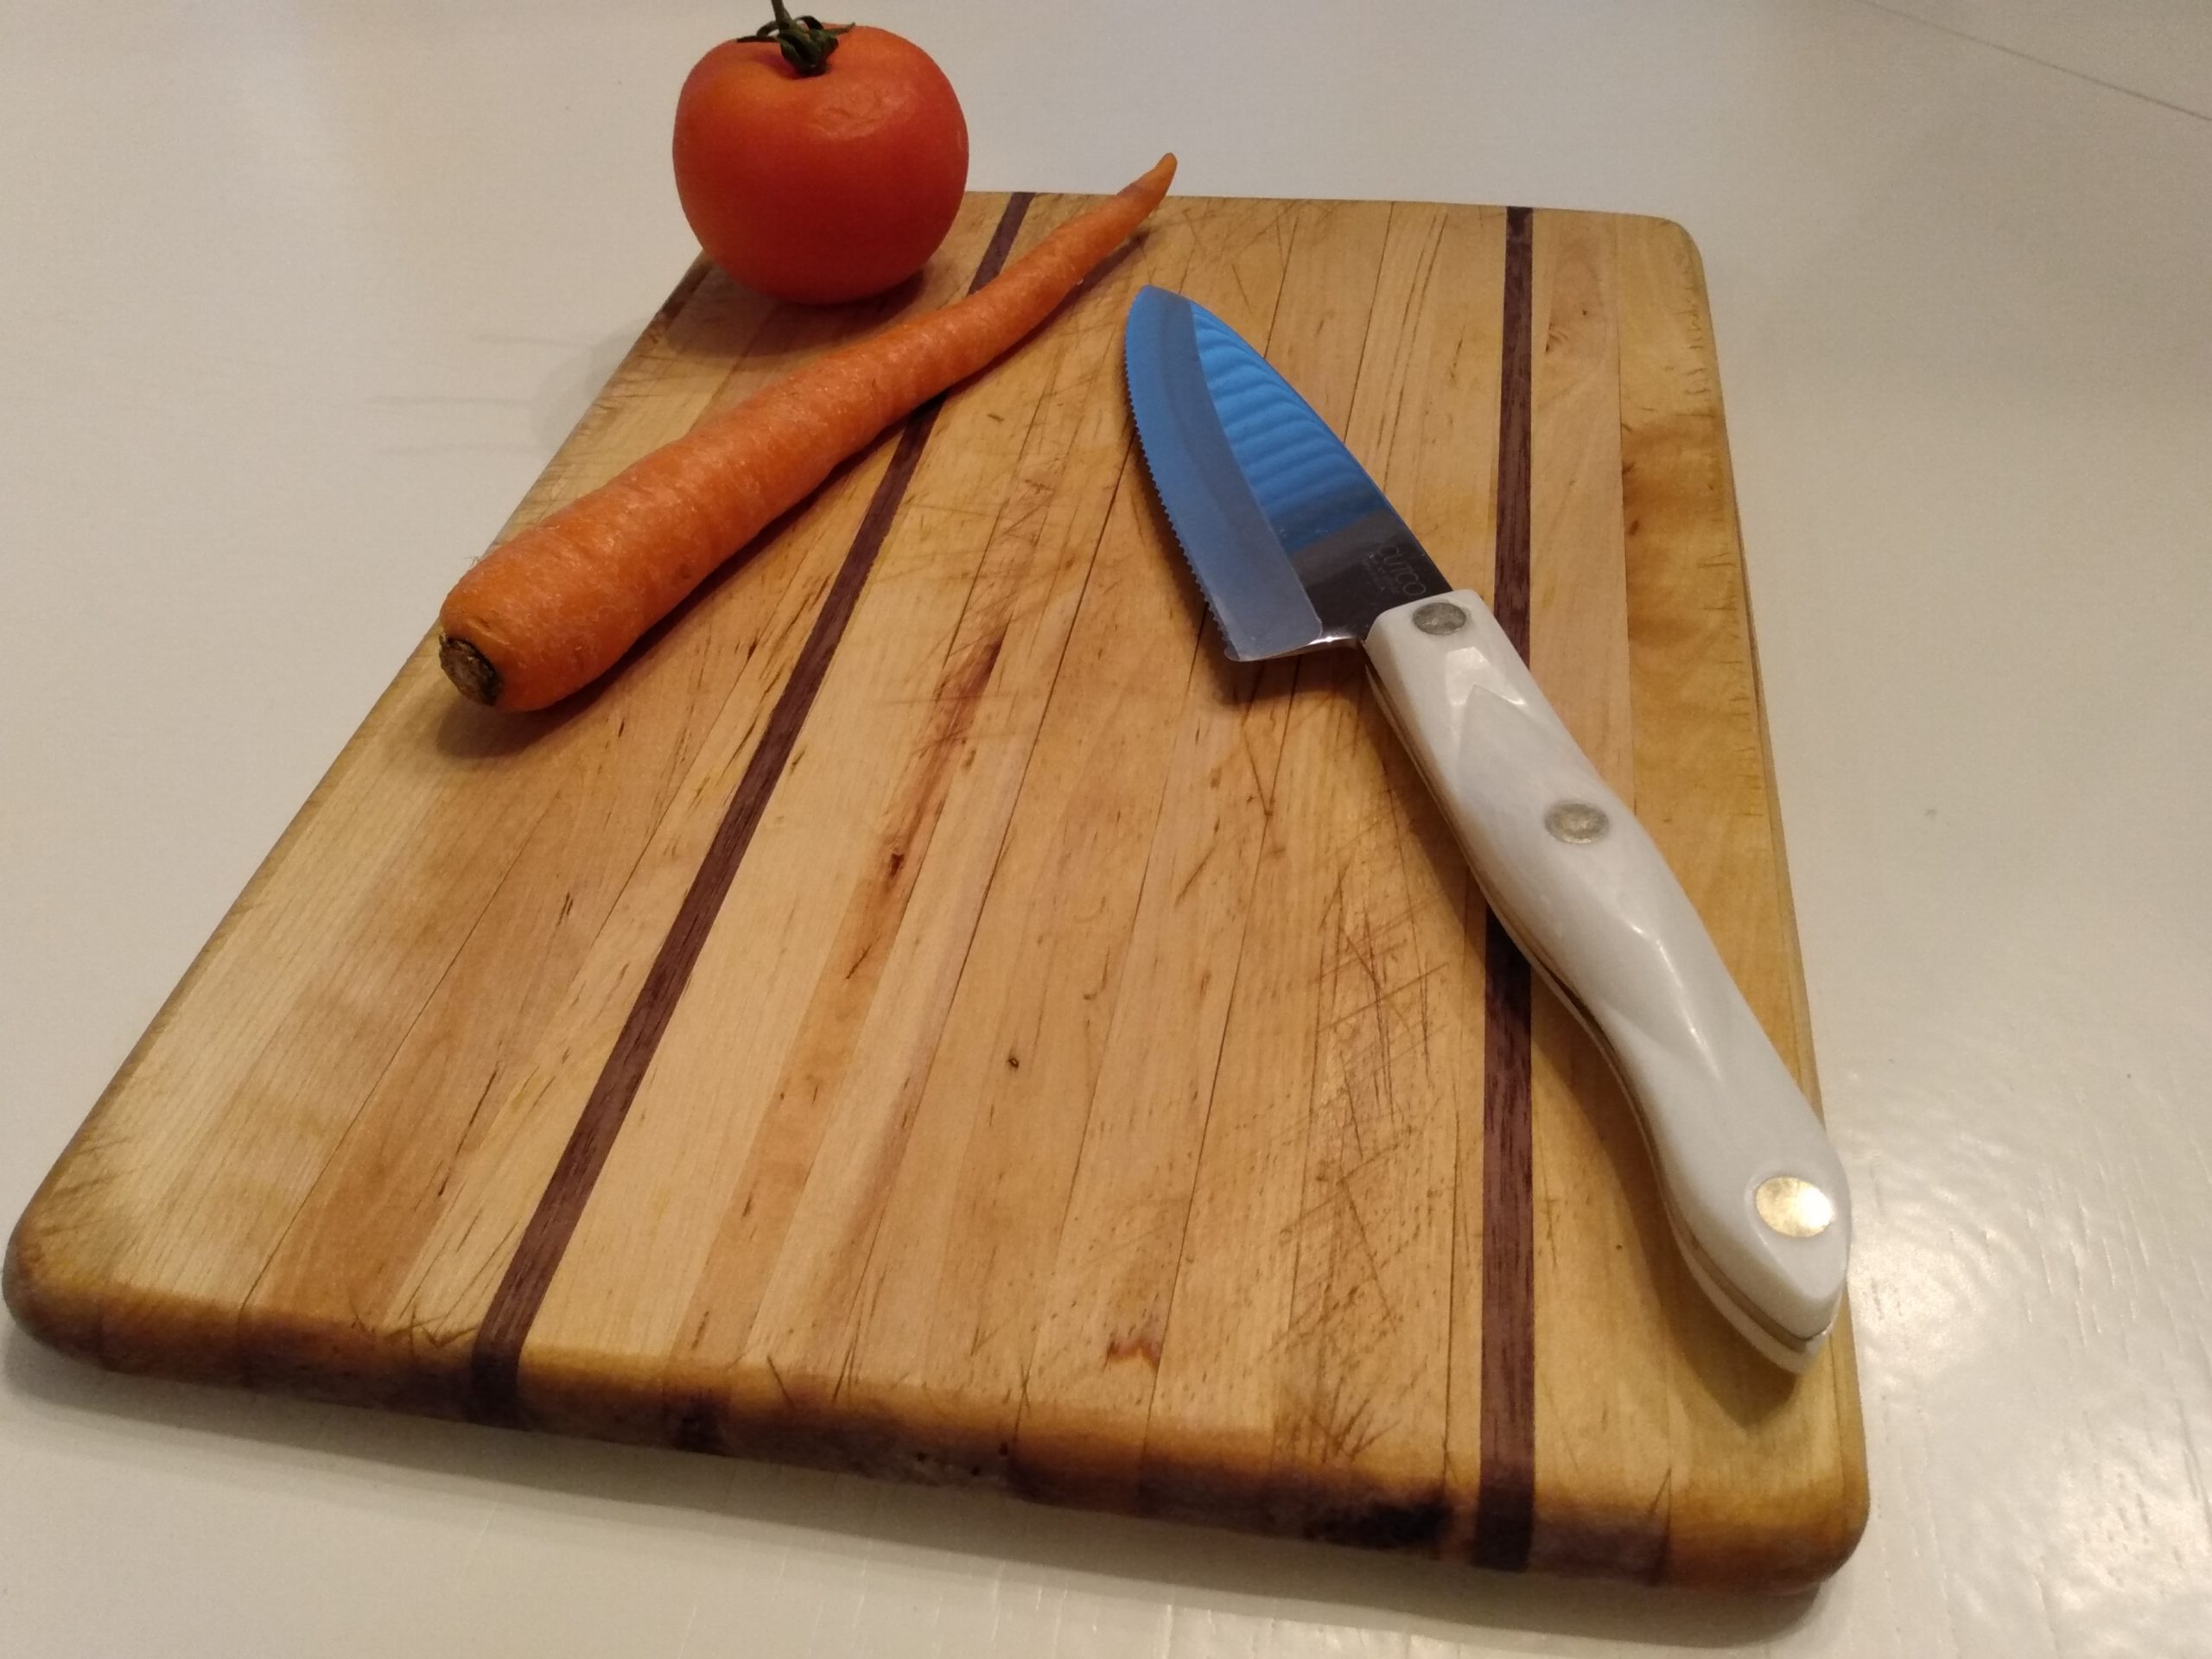 Completed cutting Board with Knife